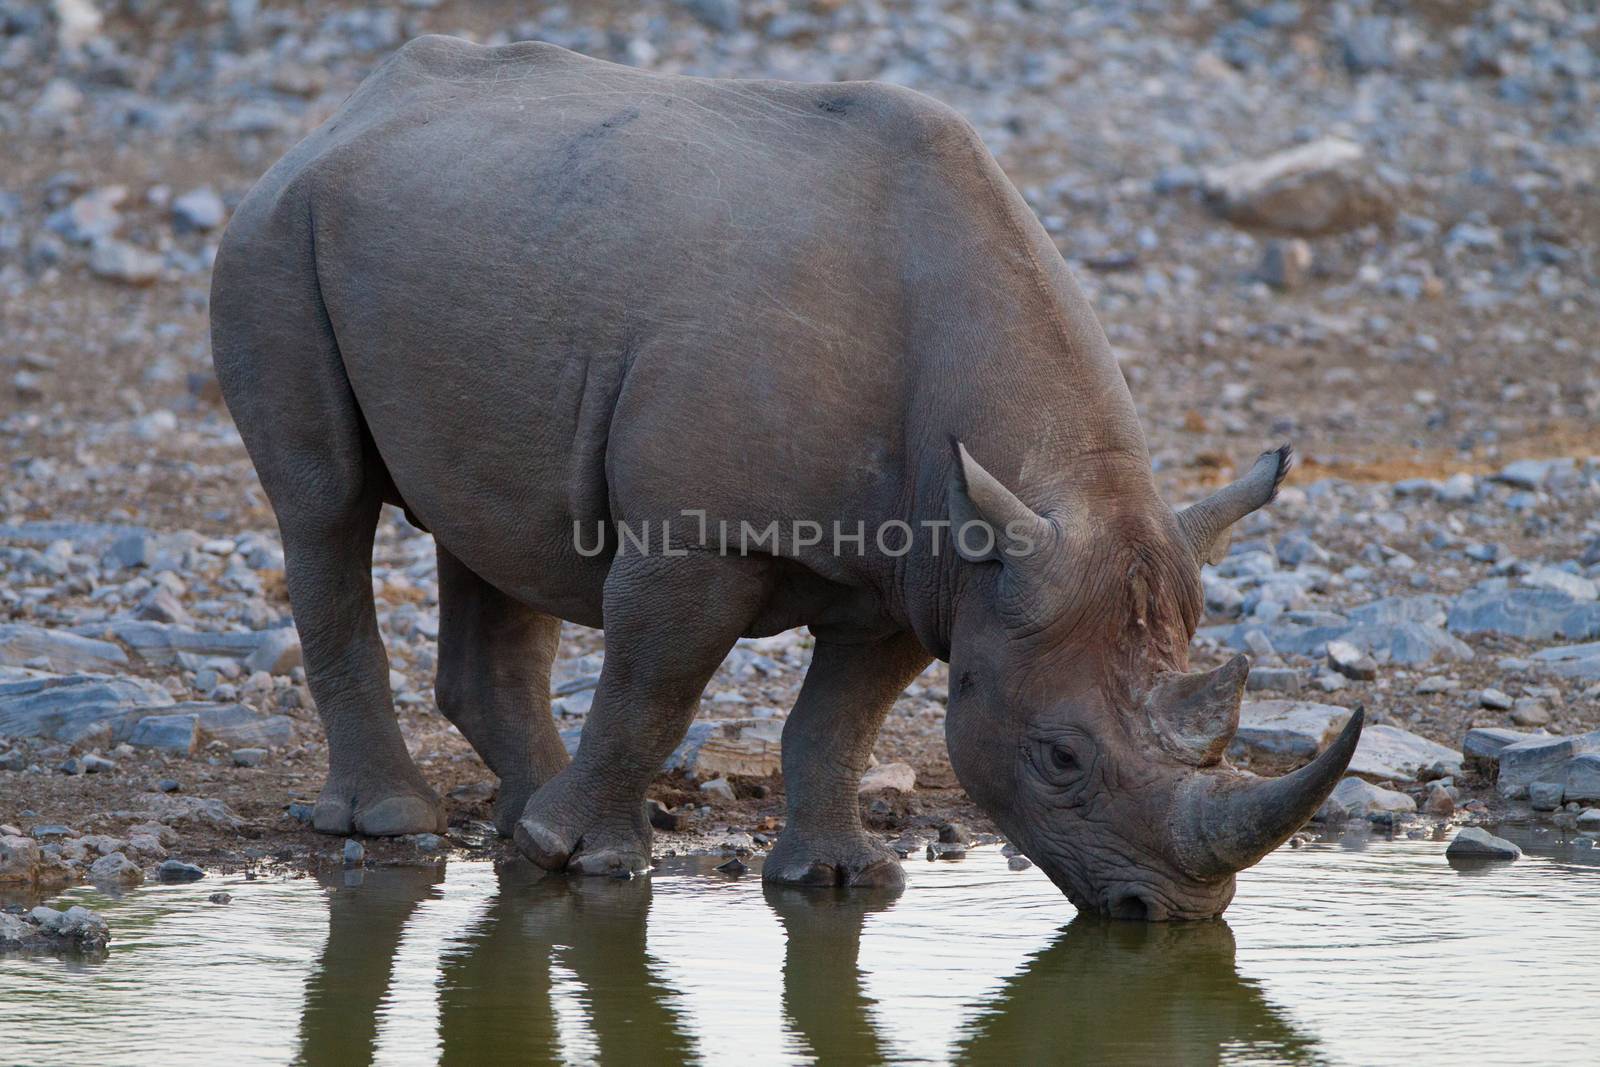 Black rhino in the wilderness of Africa